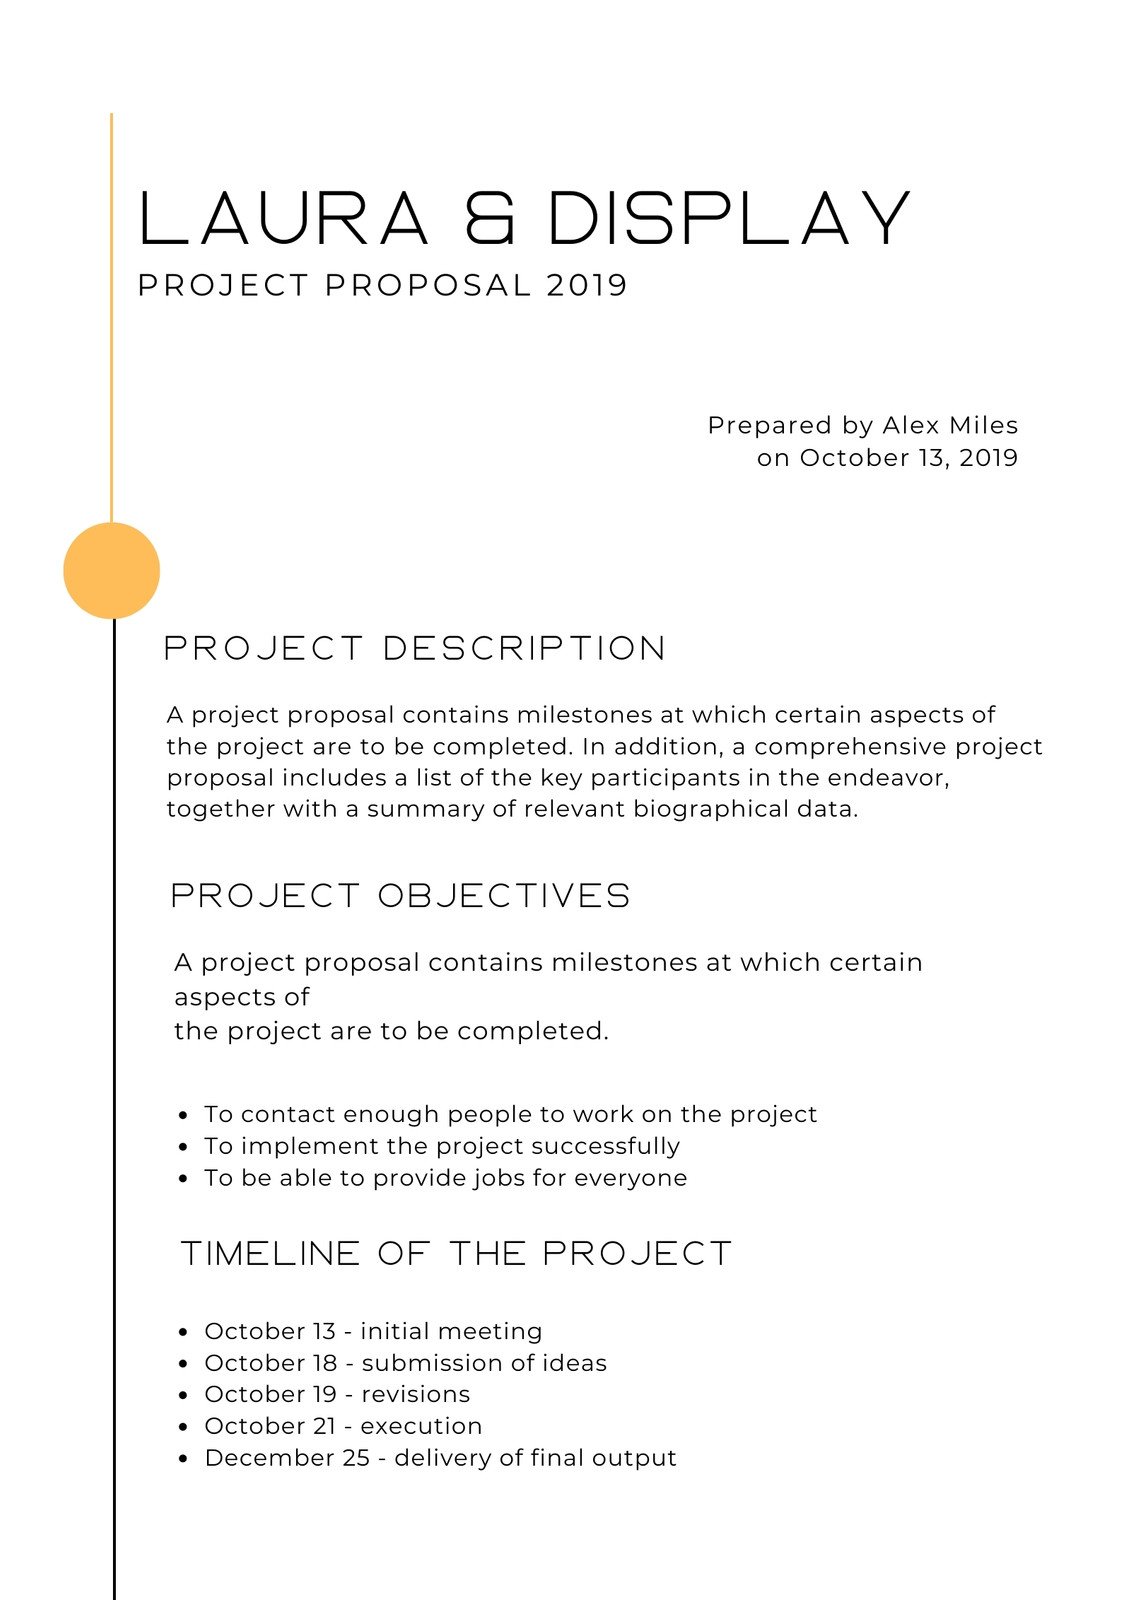 Project Proposal - prowe.